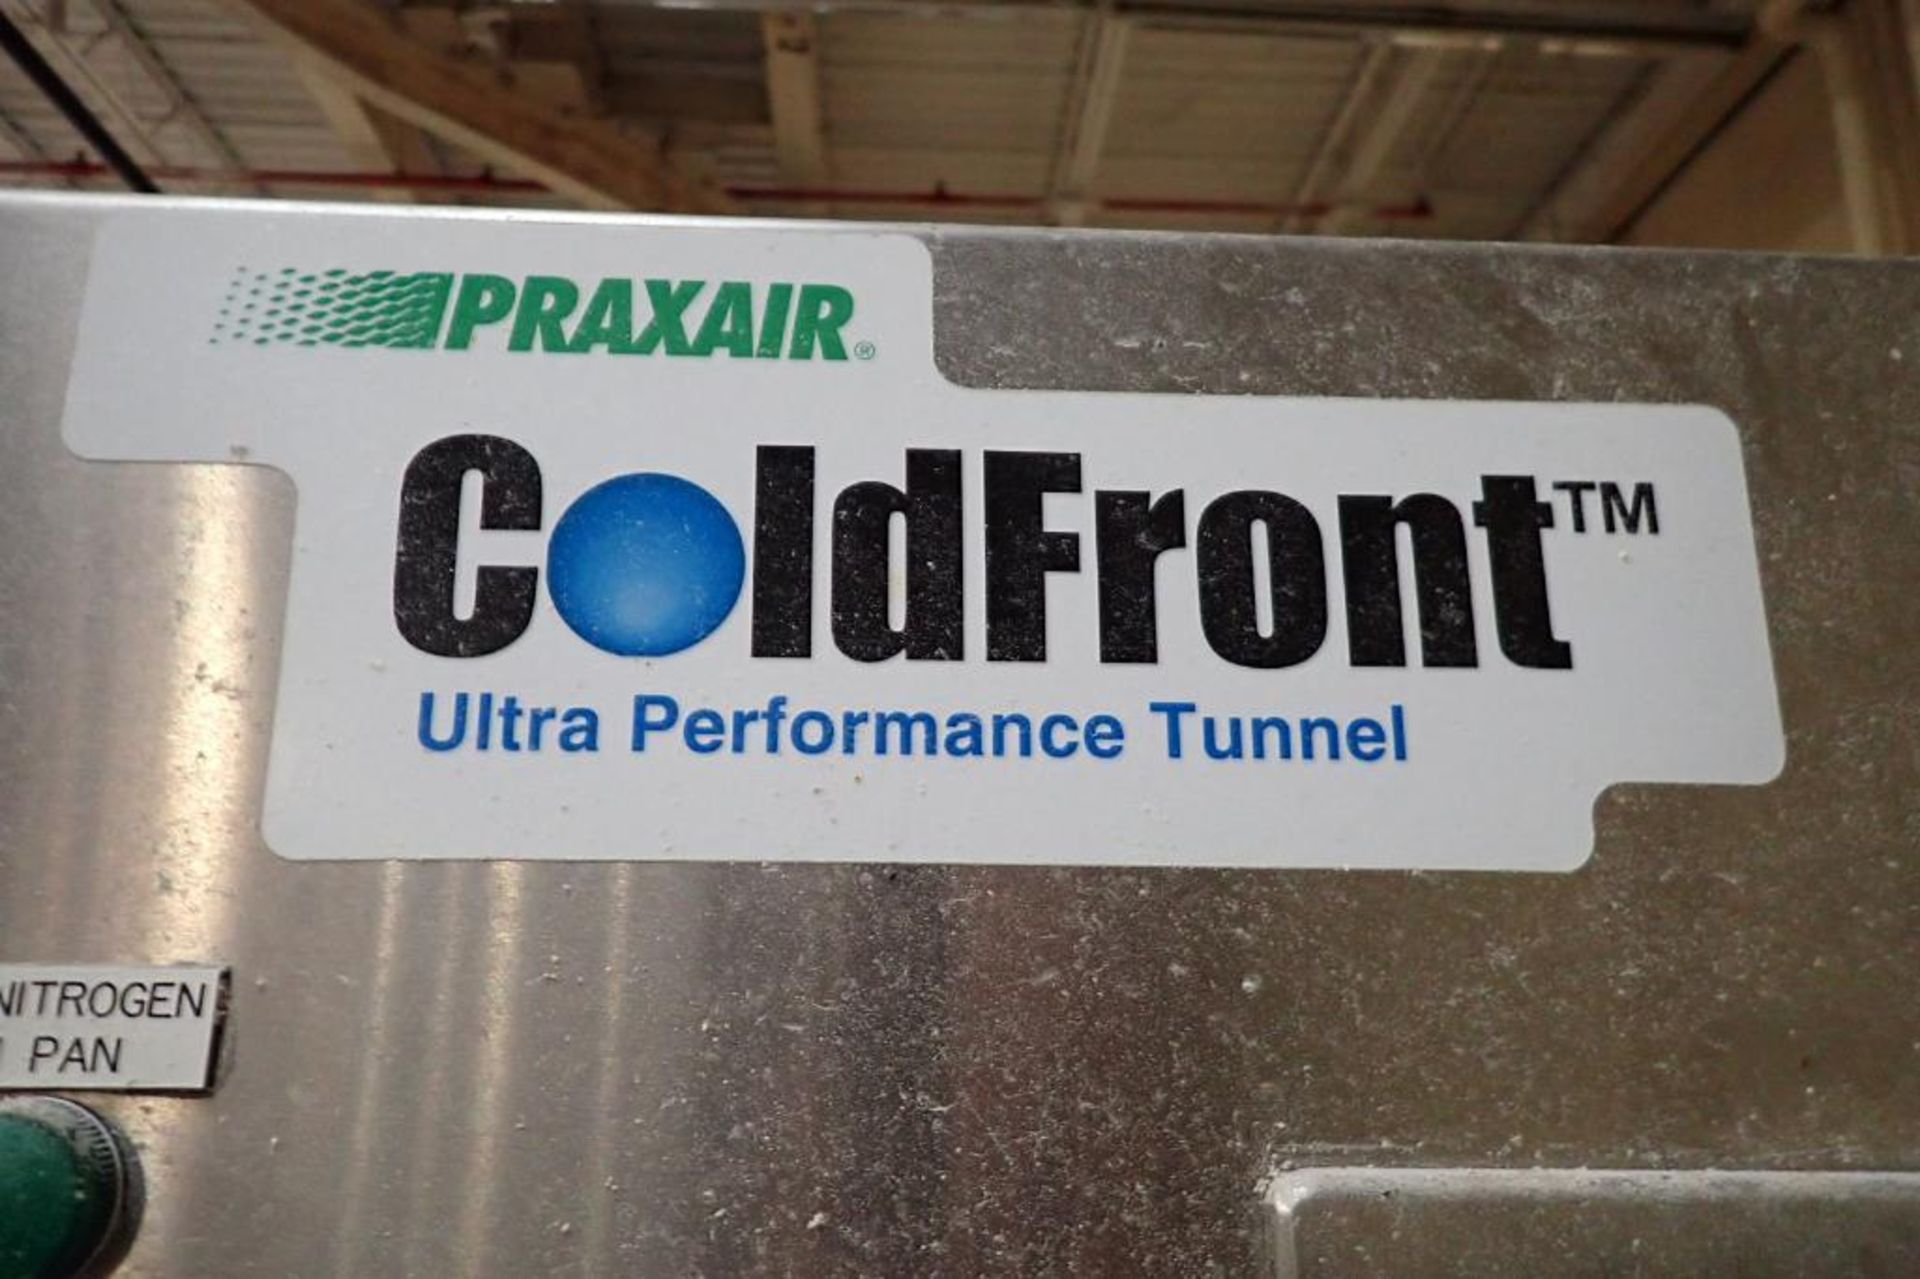 2013 Praxair nitrogen cooling tunnel {Located in Indianapolis, IN} - Image 23 of 23